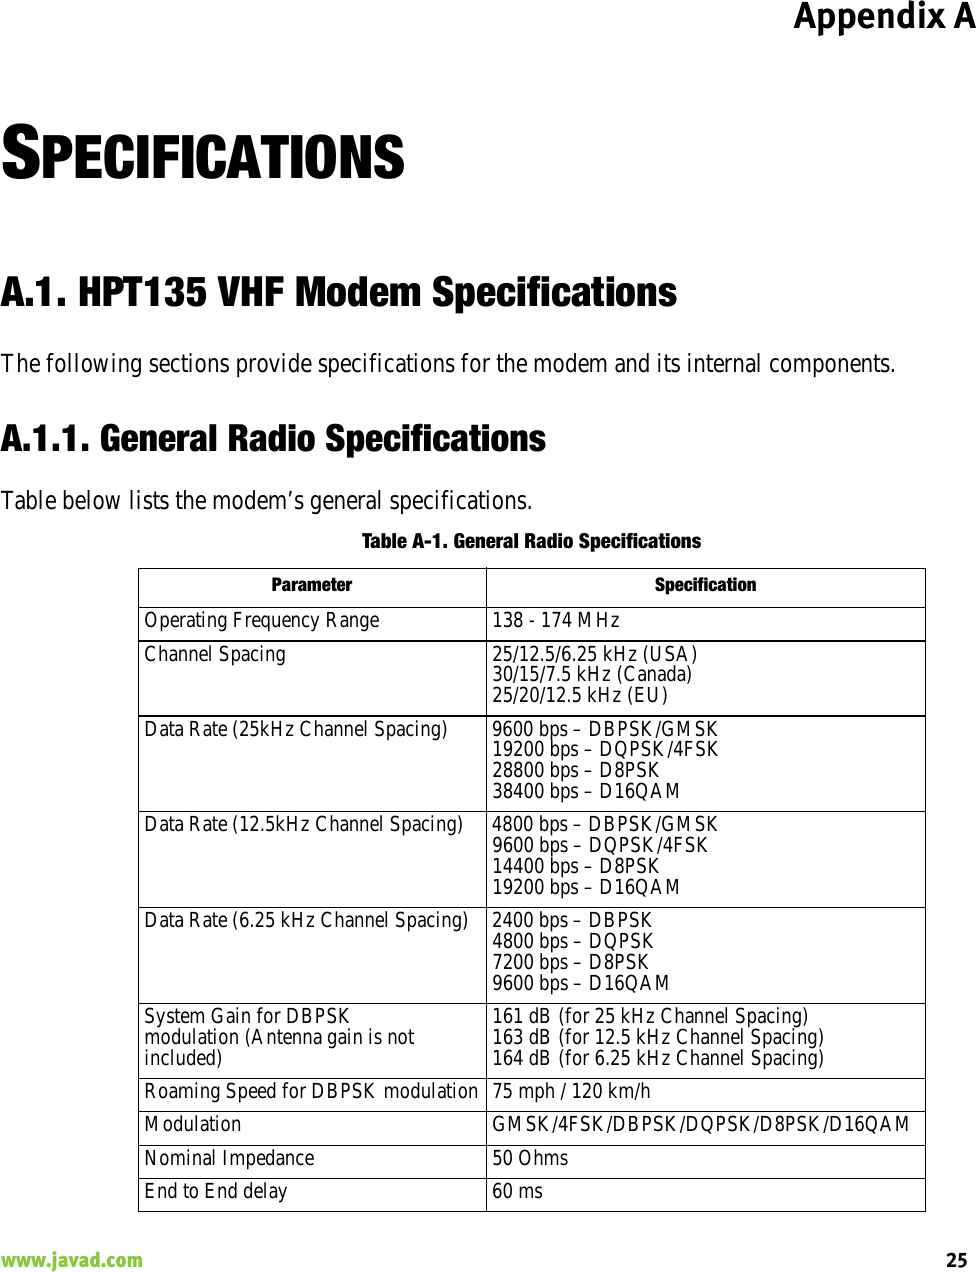 Appendix A25www.javad.com                                                                                                                                                    SPECIFICATIONSA.1. HPT135 VHF Modem SpecificationsThe following sections provide specifications for the modem and its internal components.A.1.1. General Radio SpecificationsTable below lists the modem’s general specifications.Table A-1. General Radio Specifications Parameter SpecificationOperating Frequency Range 138 - 174 MHz Channel Spacing 25/12.5/6.25 kHz (USA)30/15/7.5 kHz (Canada)25/20/12.5 kHz (EU)Data Rate (25kHz Channel Spacing) 9600 bps – DBPSK/GMSK19200 bps – DQPSK/4FSK28800 bps – D8PSK38400 bps – D16QAMData Rate (12.5kHz Channel Spacing) 4800 bps – DBPSK/GMSK9600 bps – DQPSK/4FSK14400 bps – D8PSK19200 bps – D16QAMData Rate (6.25 kHz Channel Spacing) 2400 bps – DBPSK4800 bps – DQPSK7200 bps – D8PSK9600 bps – D16QAMSystem Gain for DBPSKmodulation (Antenna gain is notincluded)161 dB (for 25 kHz Channel Spacing)163 dB (for 12.5 kHz Channel Spacing)164 dB (for 6.25 kHz Channel Spacing)Roaming Speed for DBPSK modulation 75 mph / 120 km/hModulation GMSK/4FSK/DBPSK/DQPSK/D8PSK/D16QAM Nominal Impedance 50 OhmsEnd to End delay 60 ms